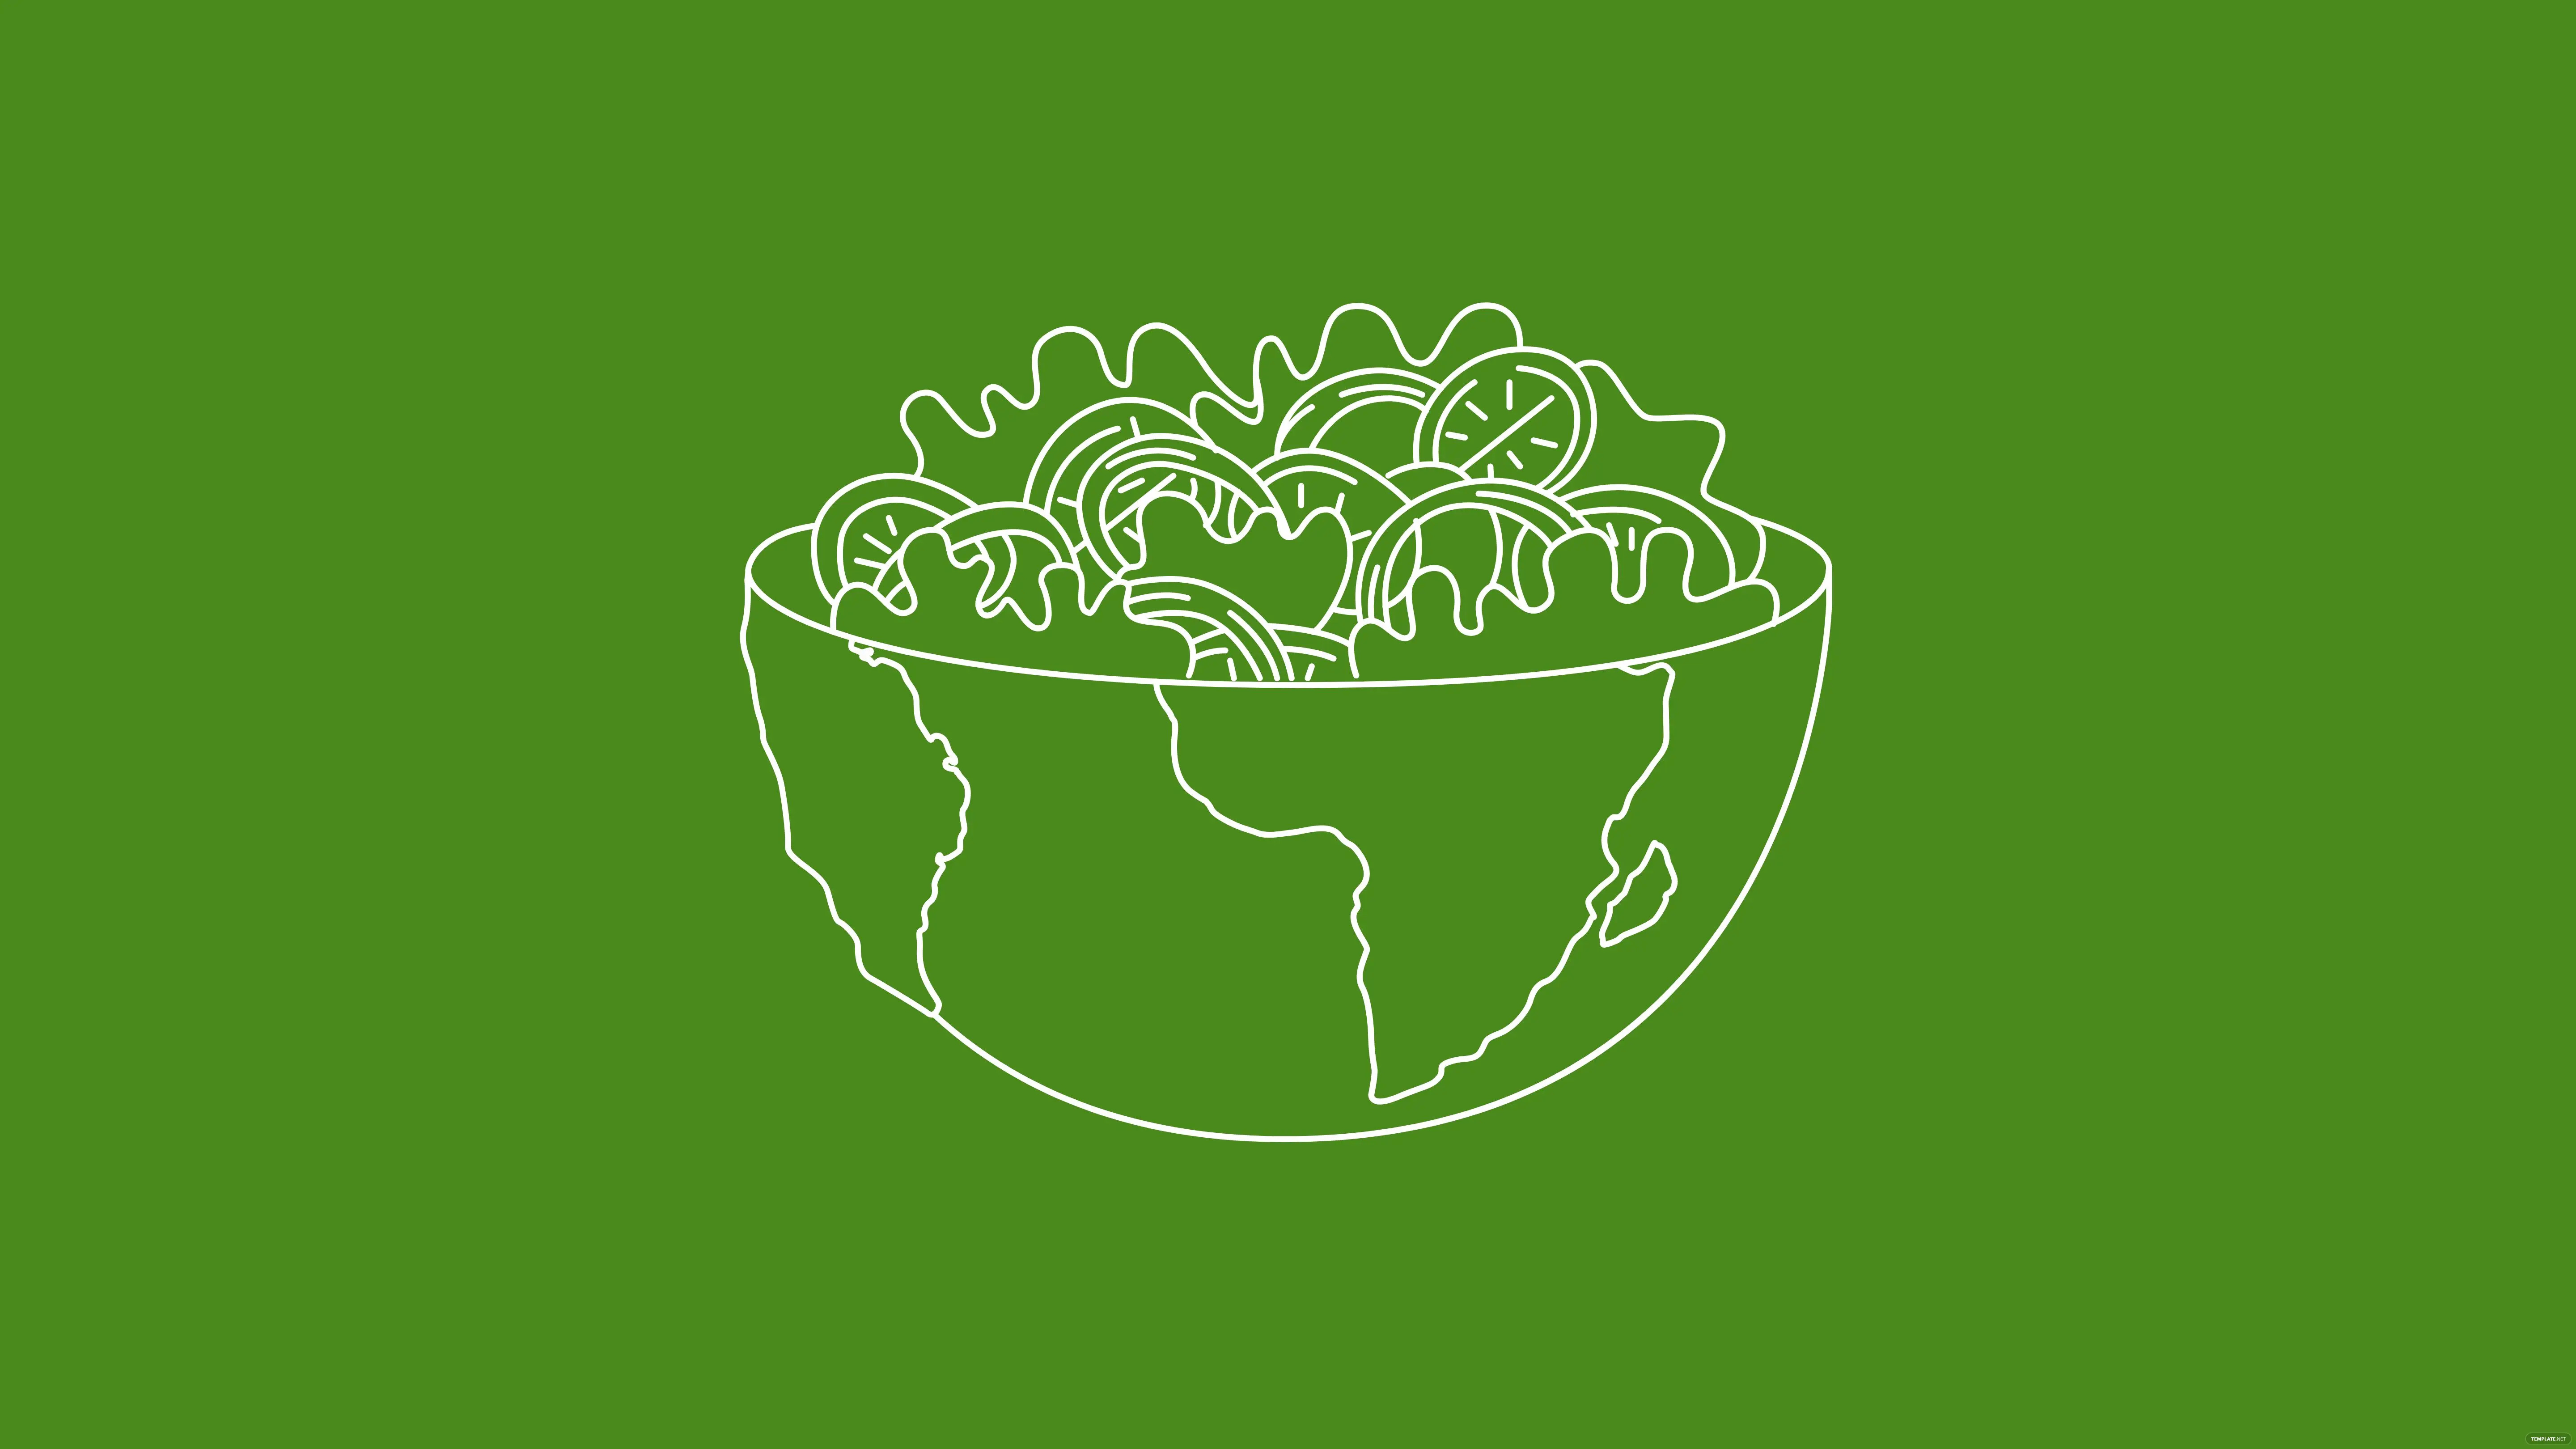 world food day drawing background